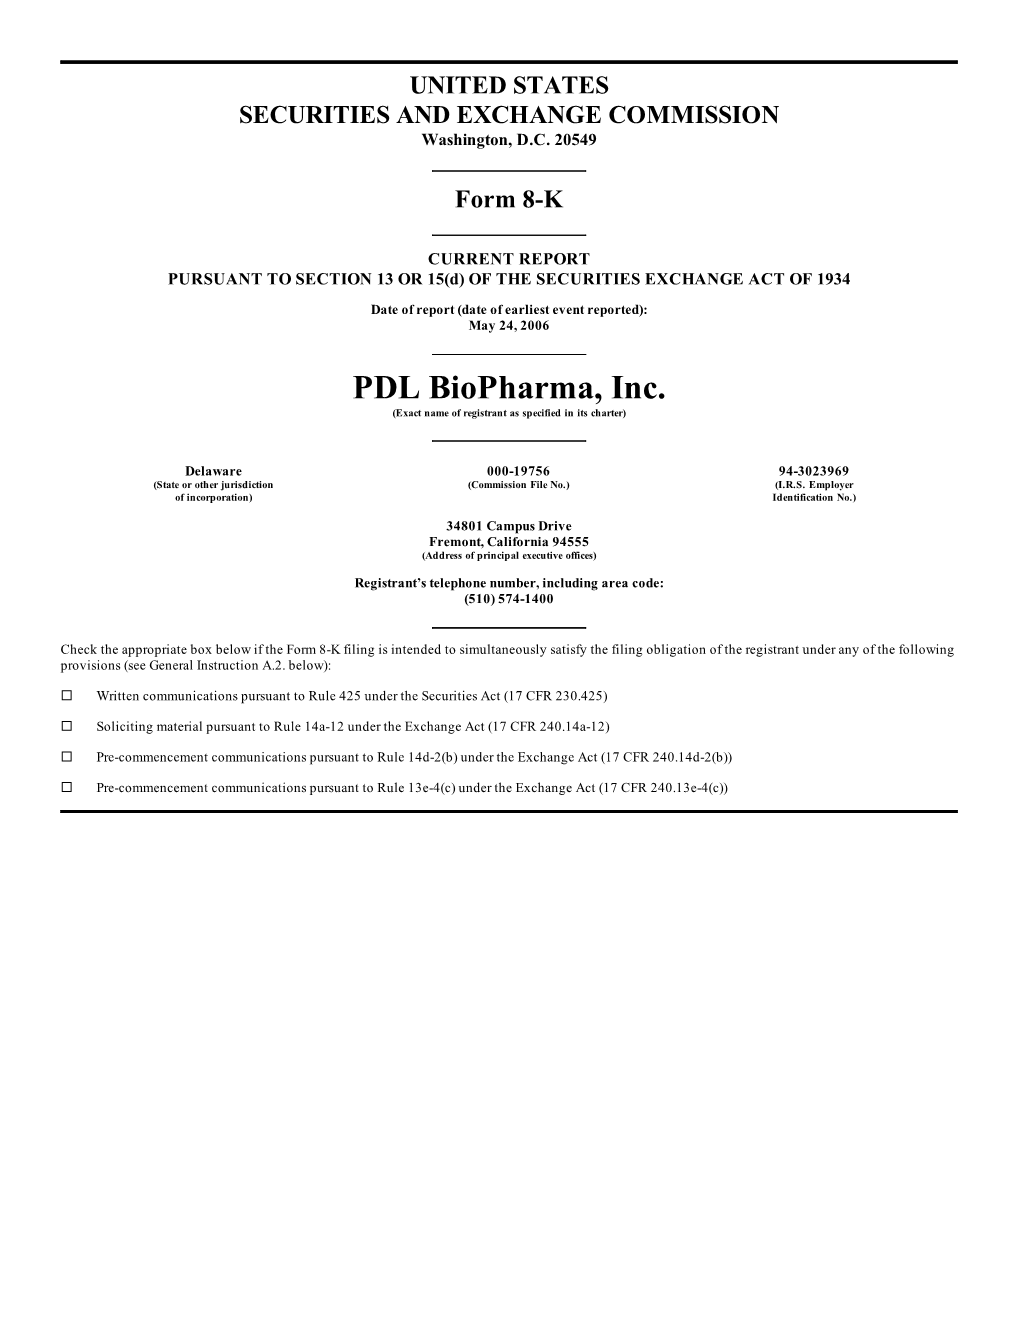 PDL Biopharma, Inc. (Exact Name of Registrant As Specified in Its Charter)